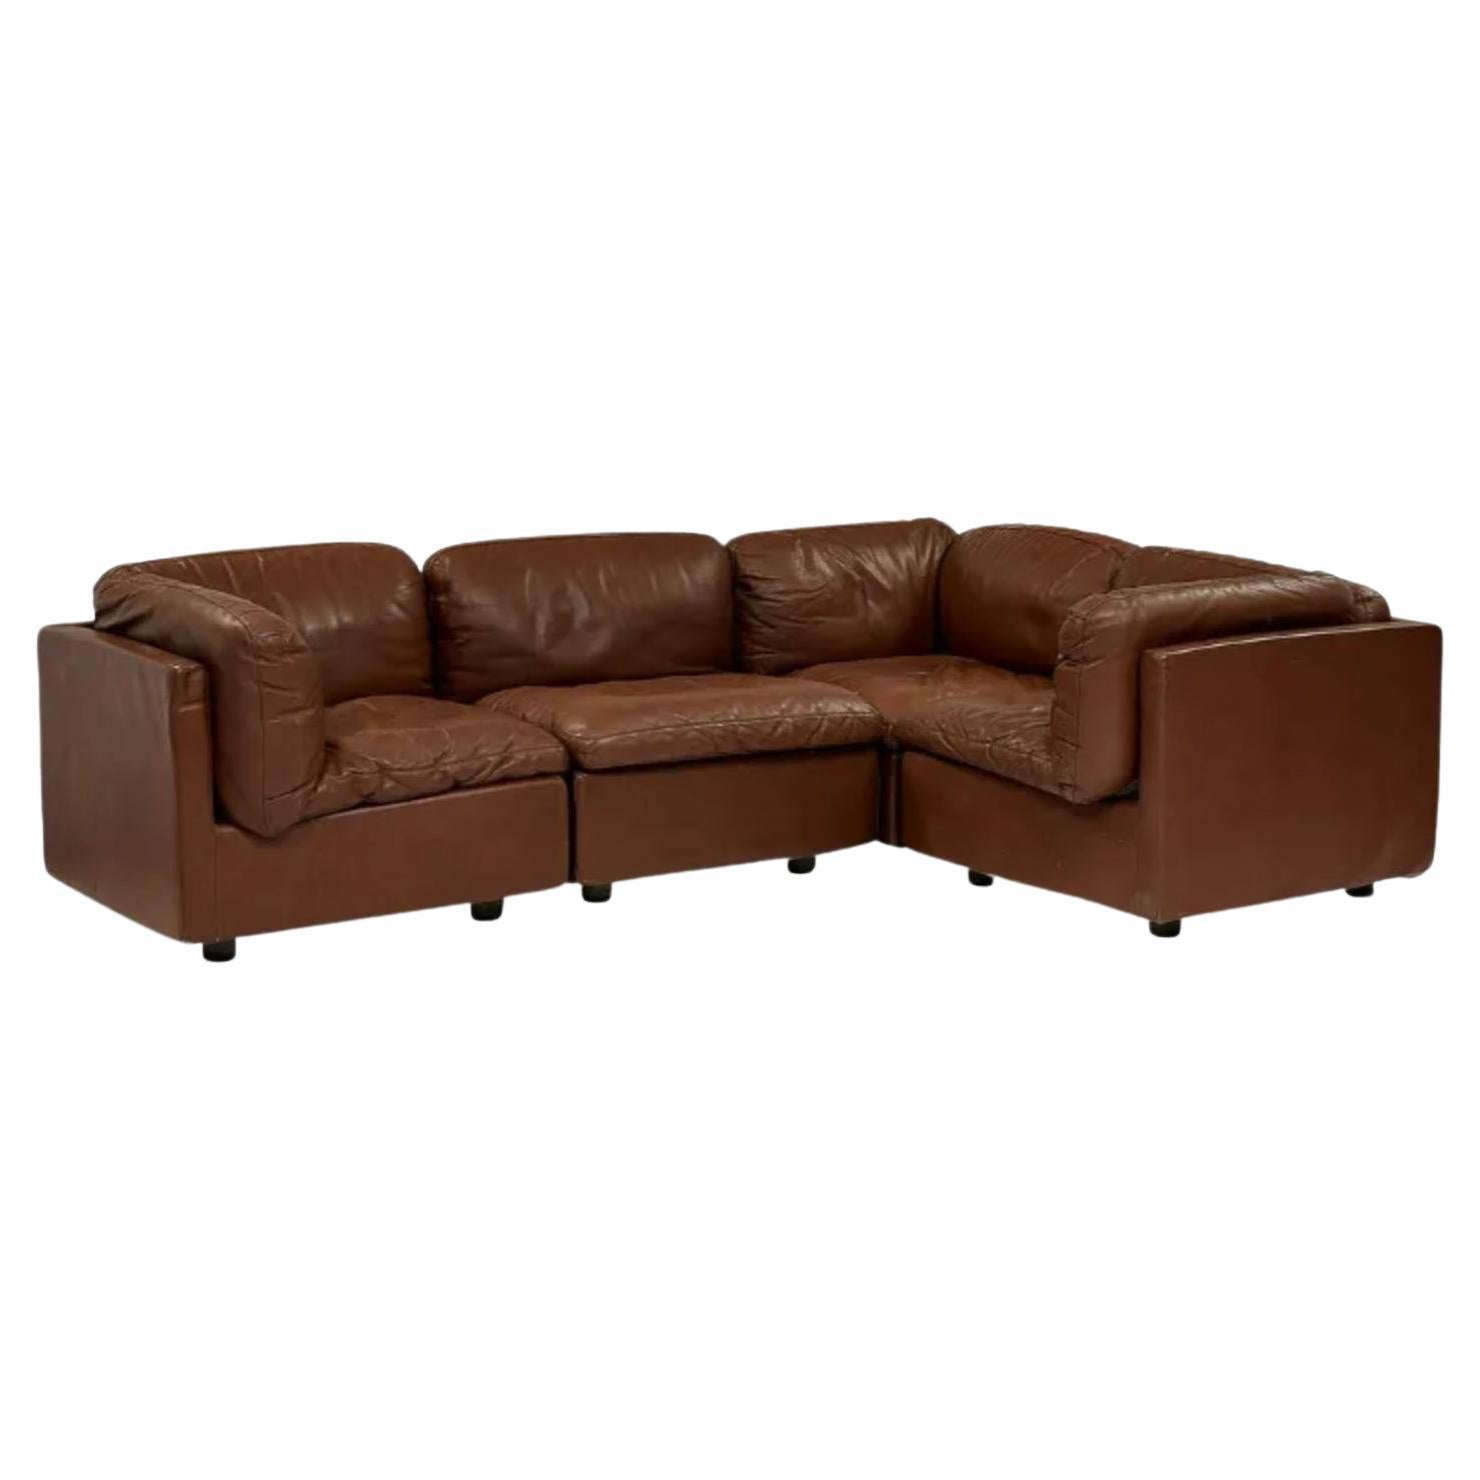 Zanotta, Jonathan de Pas, Cento Sectional Sofa, Brown Leather, 1973, Italy For Sale